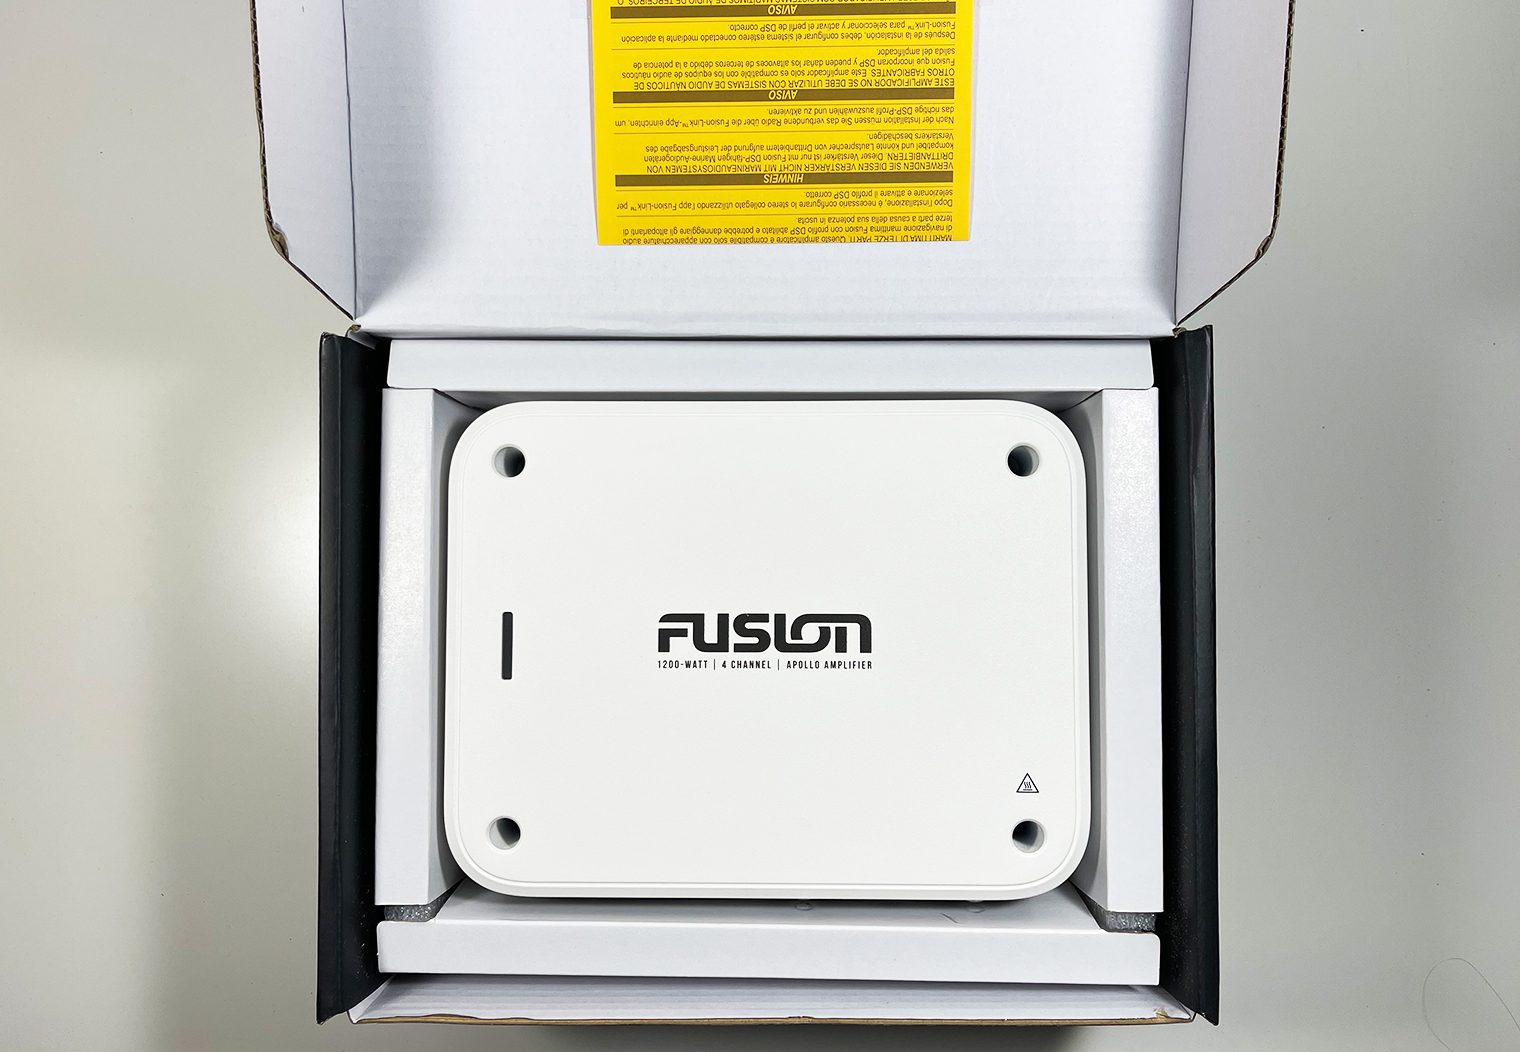 Fusion Apollo MS-AP41200 box open with protective foam removed to expose the amplifier